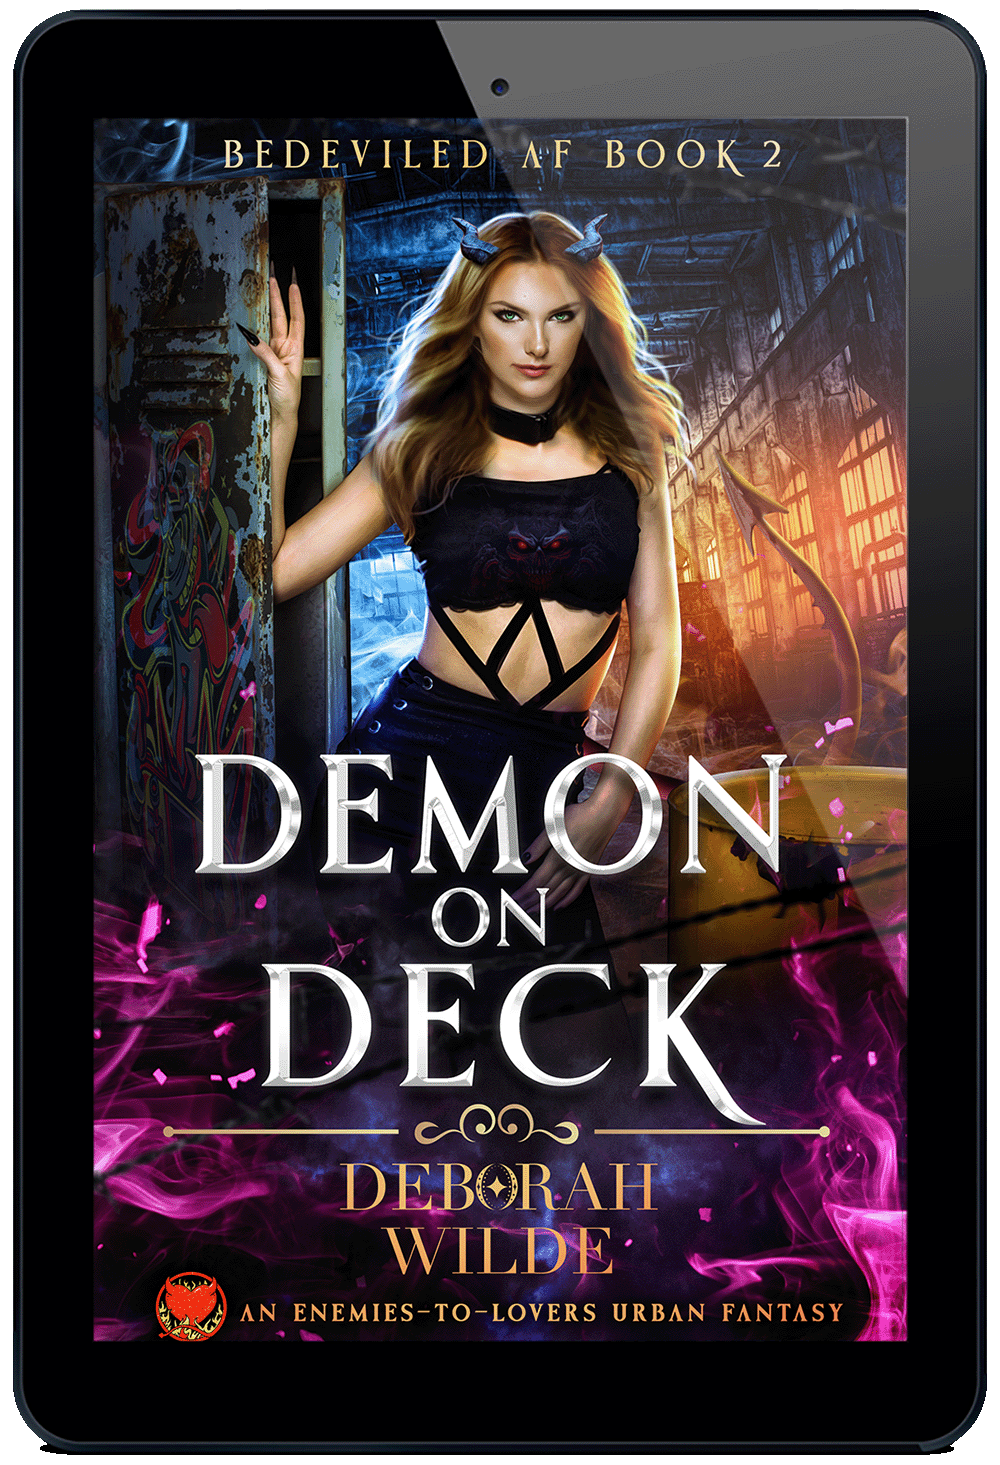 Book cover for Demon on Deck, book 2 in the funny sexy urban fantasy series Bedeviled AF.